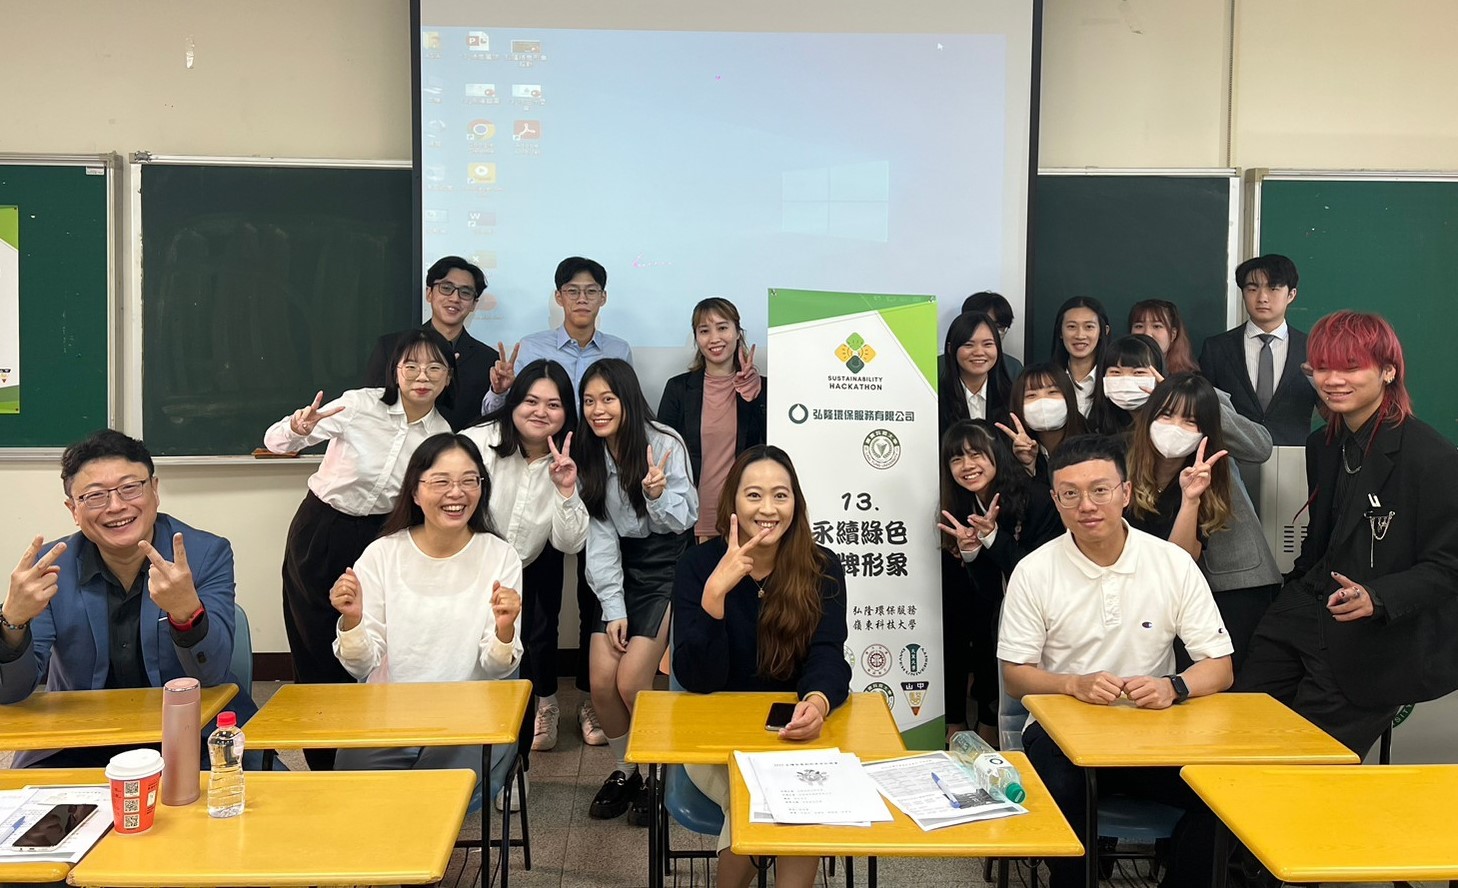 Students from Asia University participated in the hackathon, engaging effectively with the corporate sponsors, and presenting innovative solutions